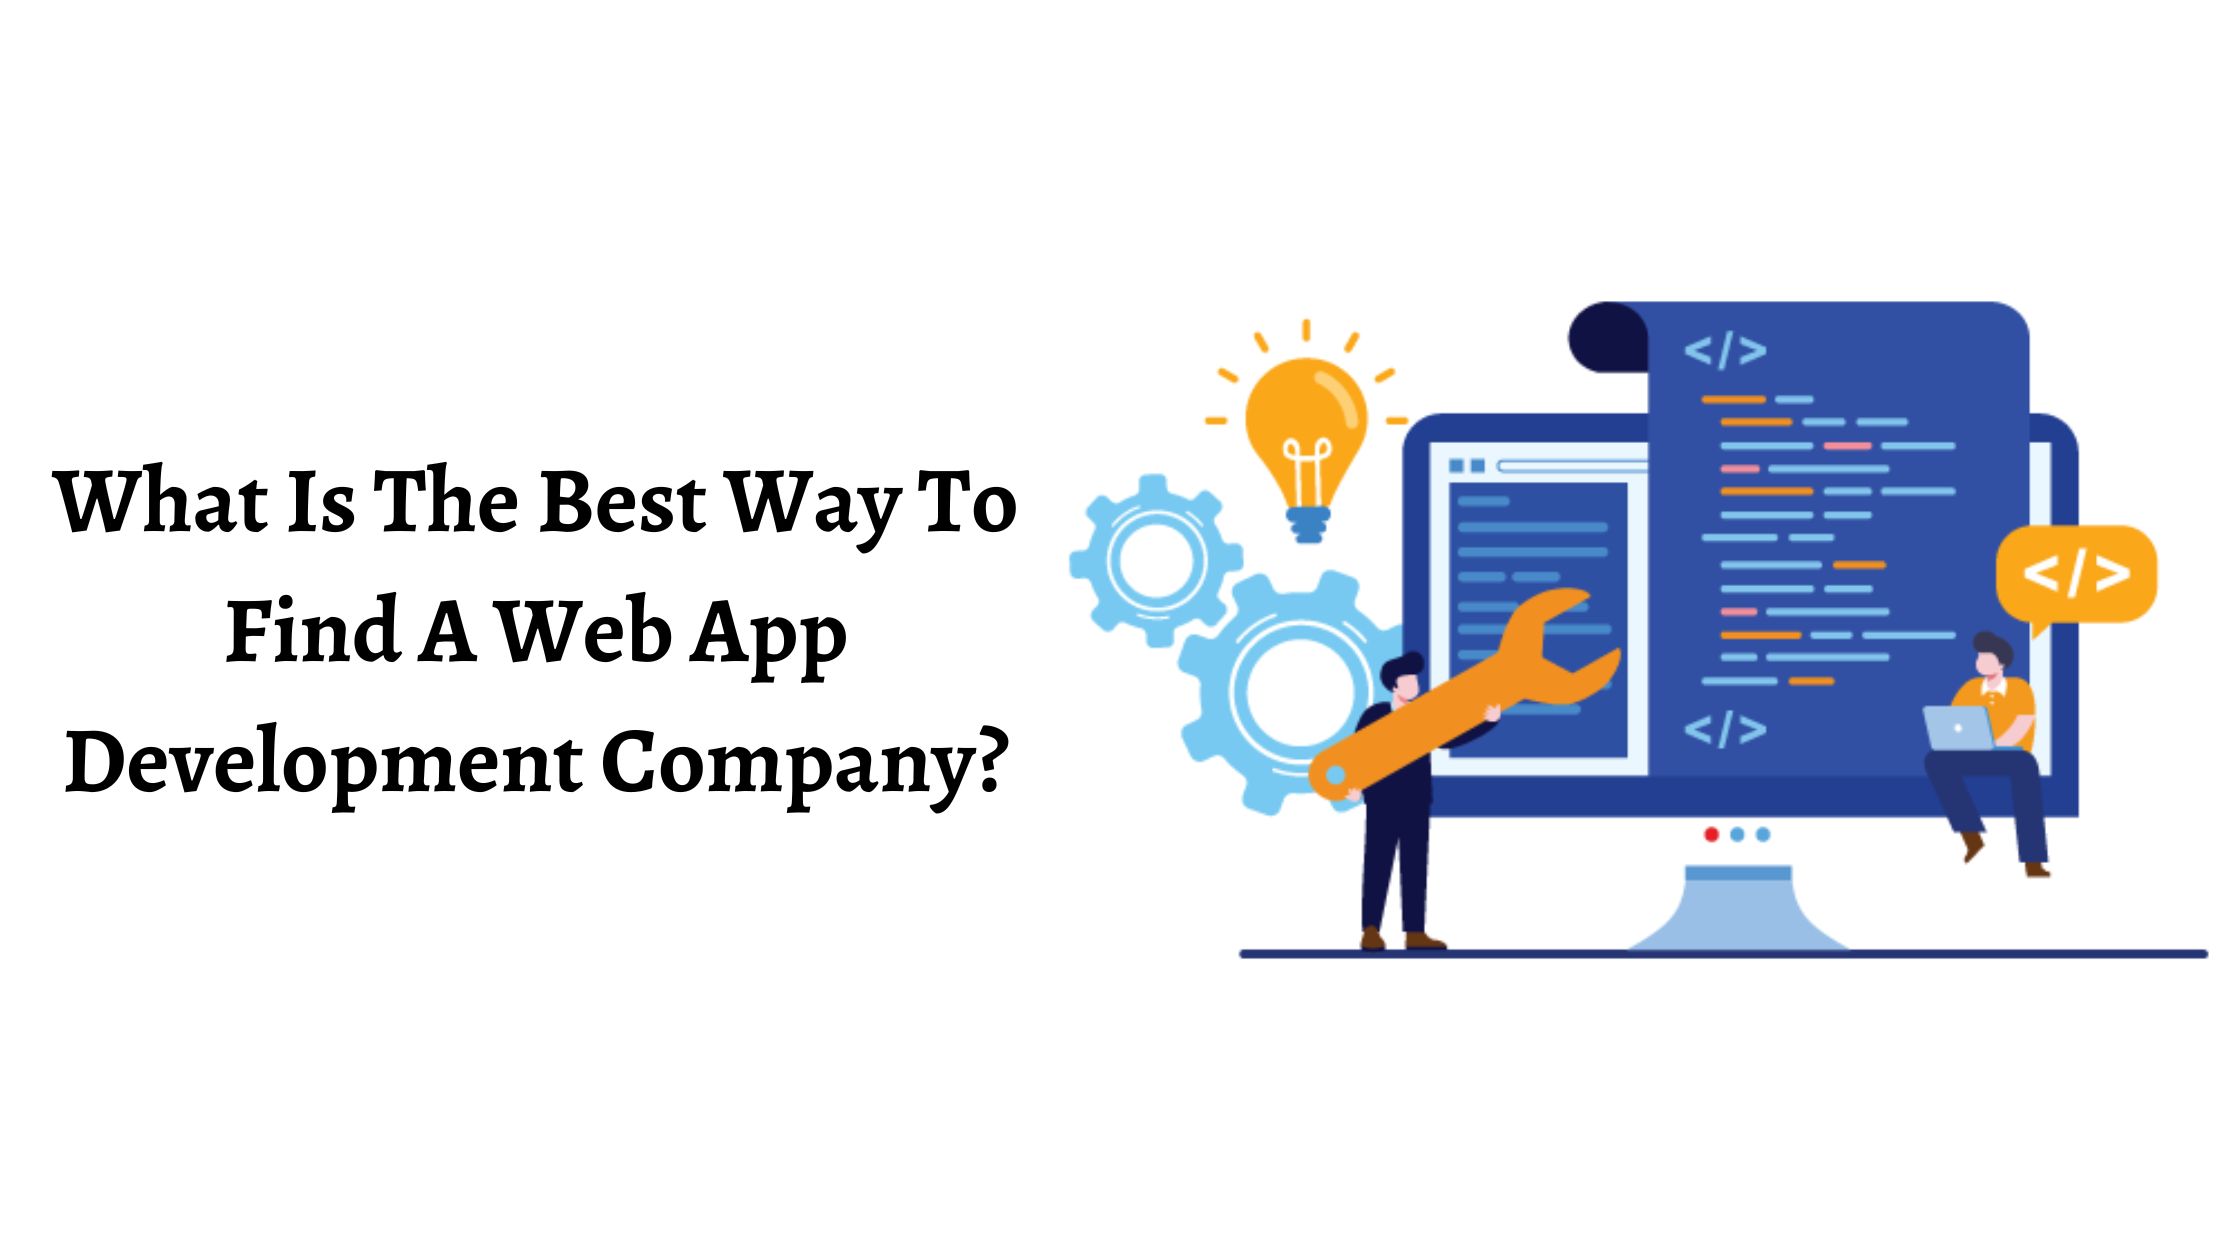 What Is The Best Way To Find A Web App Development Company?